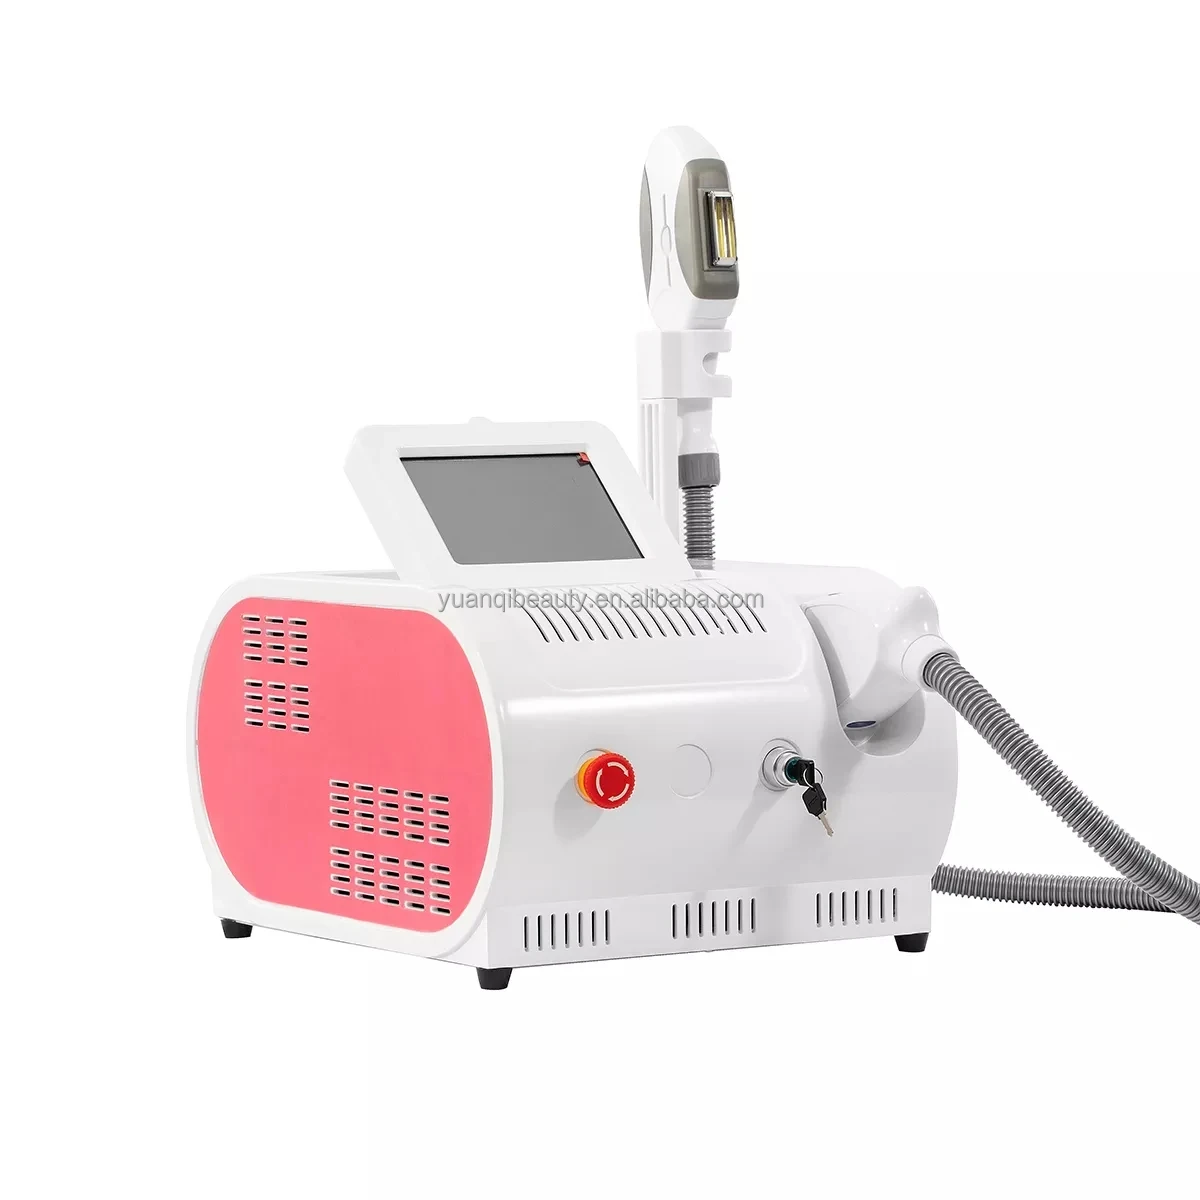 

2022 OPT IPL+Elight+SHR 3 in 1 Laser 8 Filters Skin Care Spot Remove Permanent Hair Removal Machine For Beauty Salon Spa